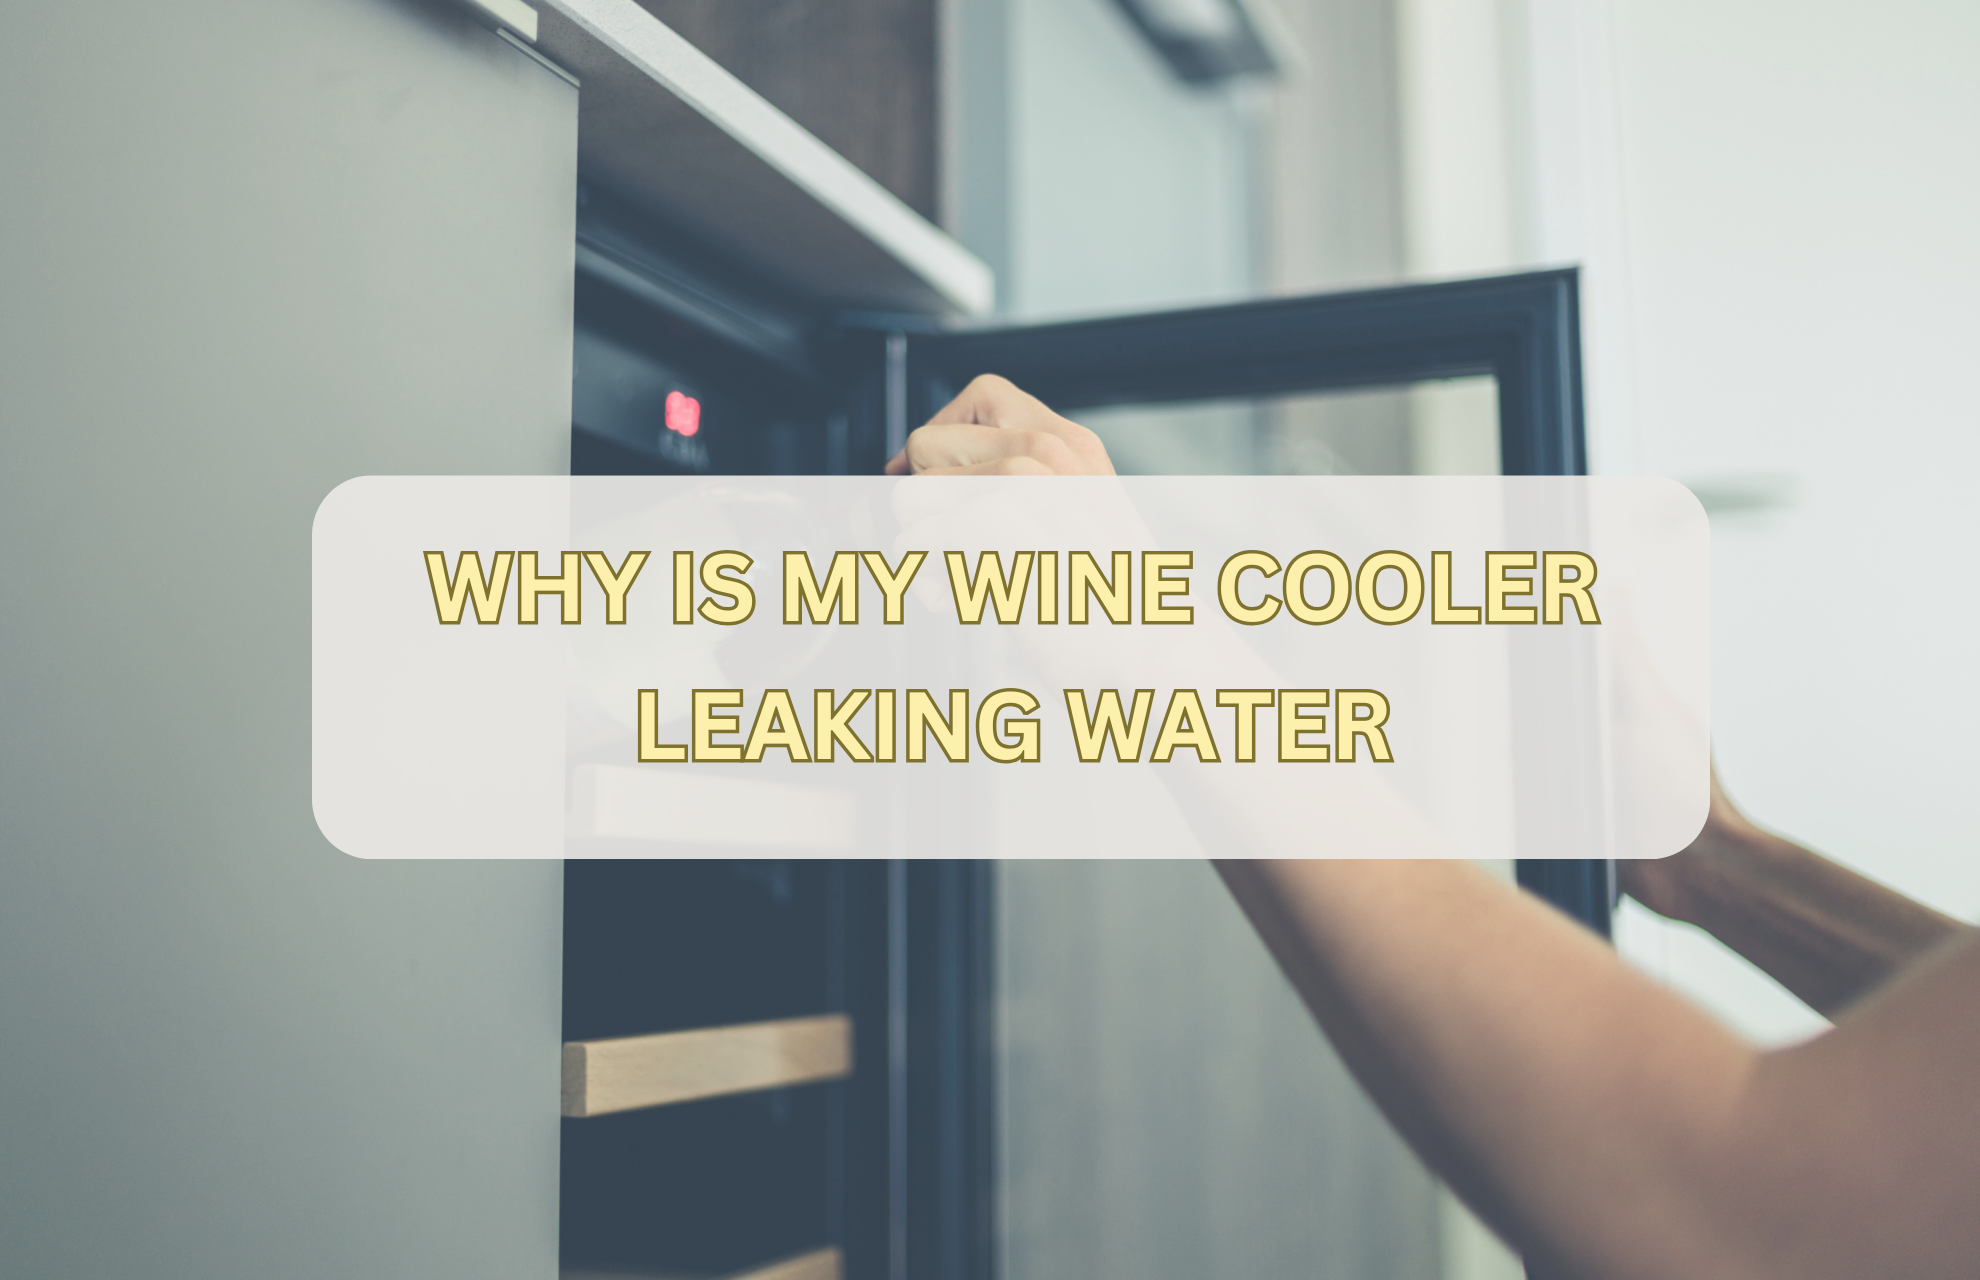 WHY IS MY WINE COOLER LEAKING WATER